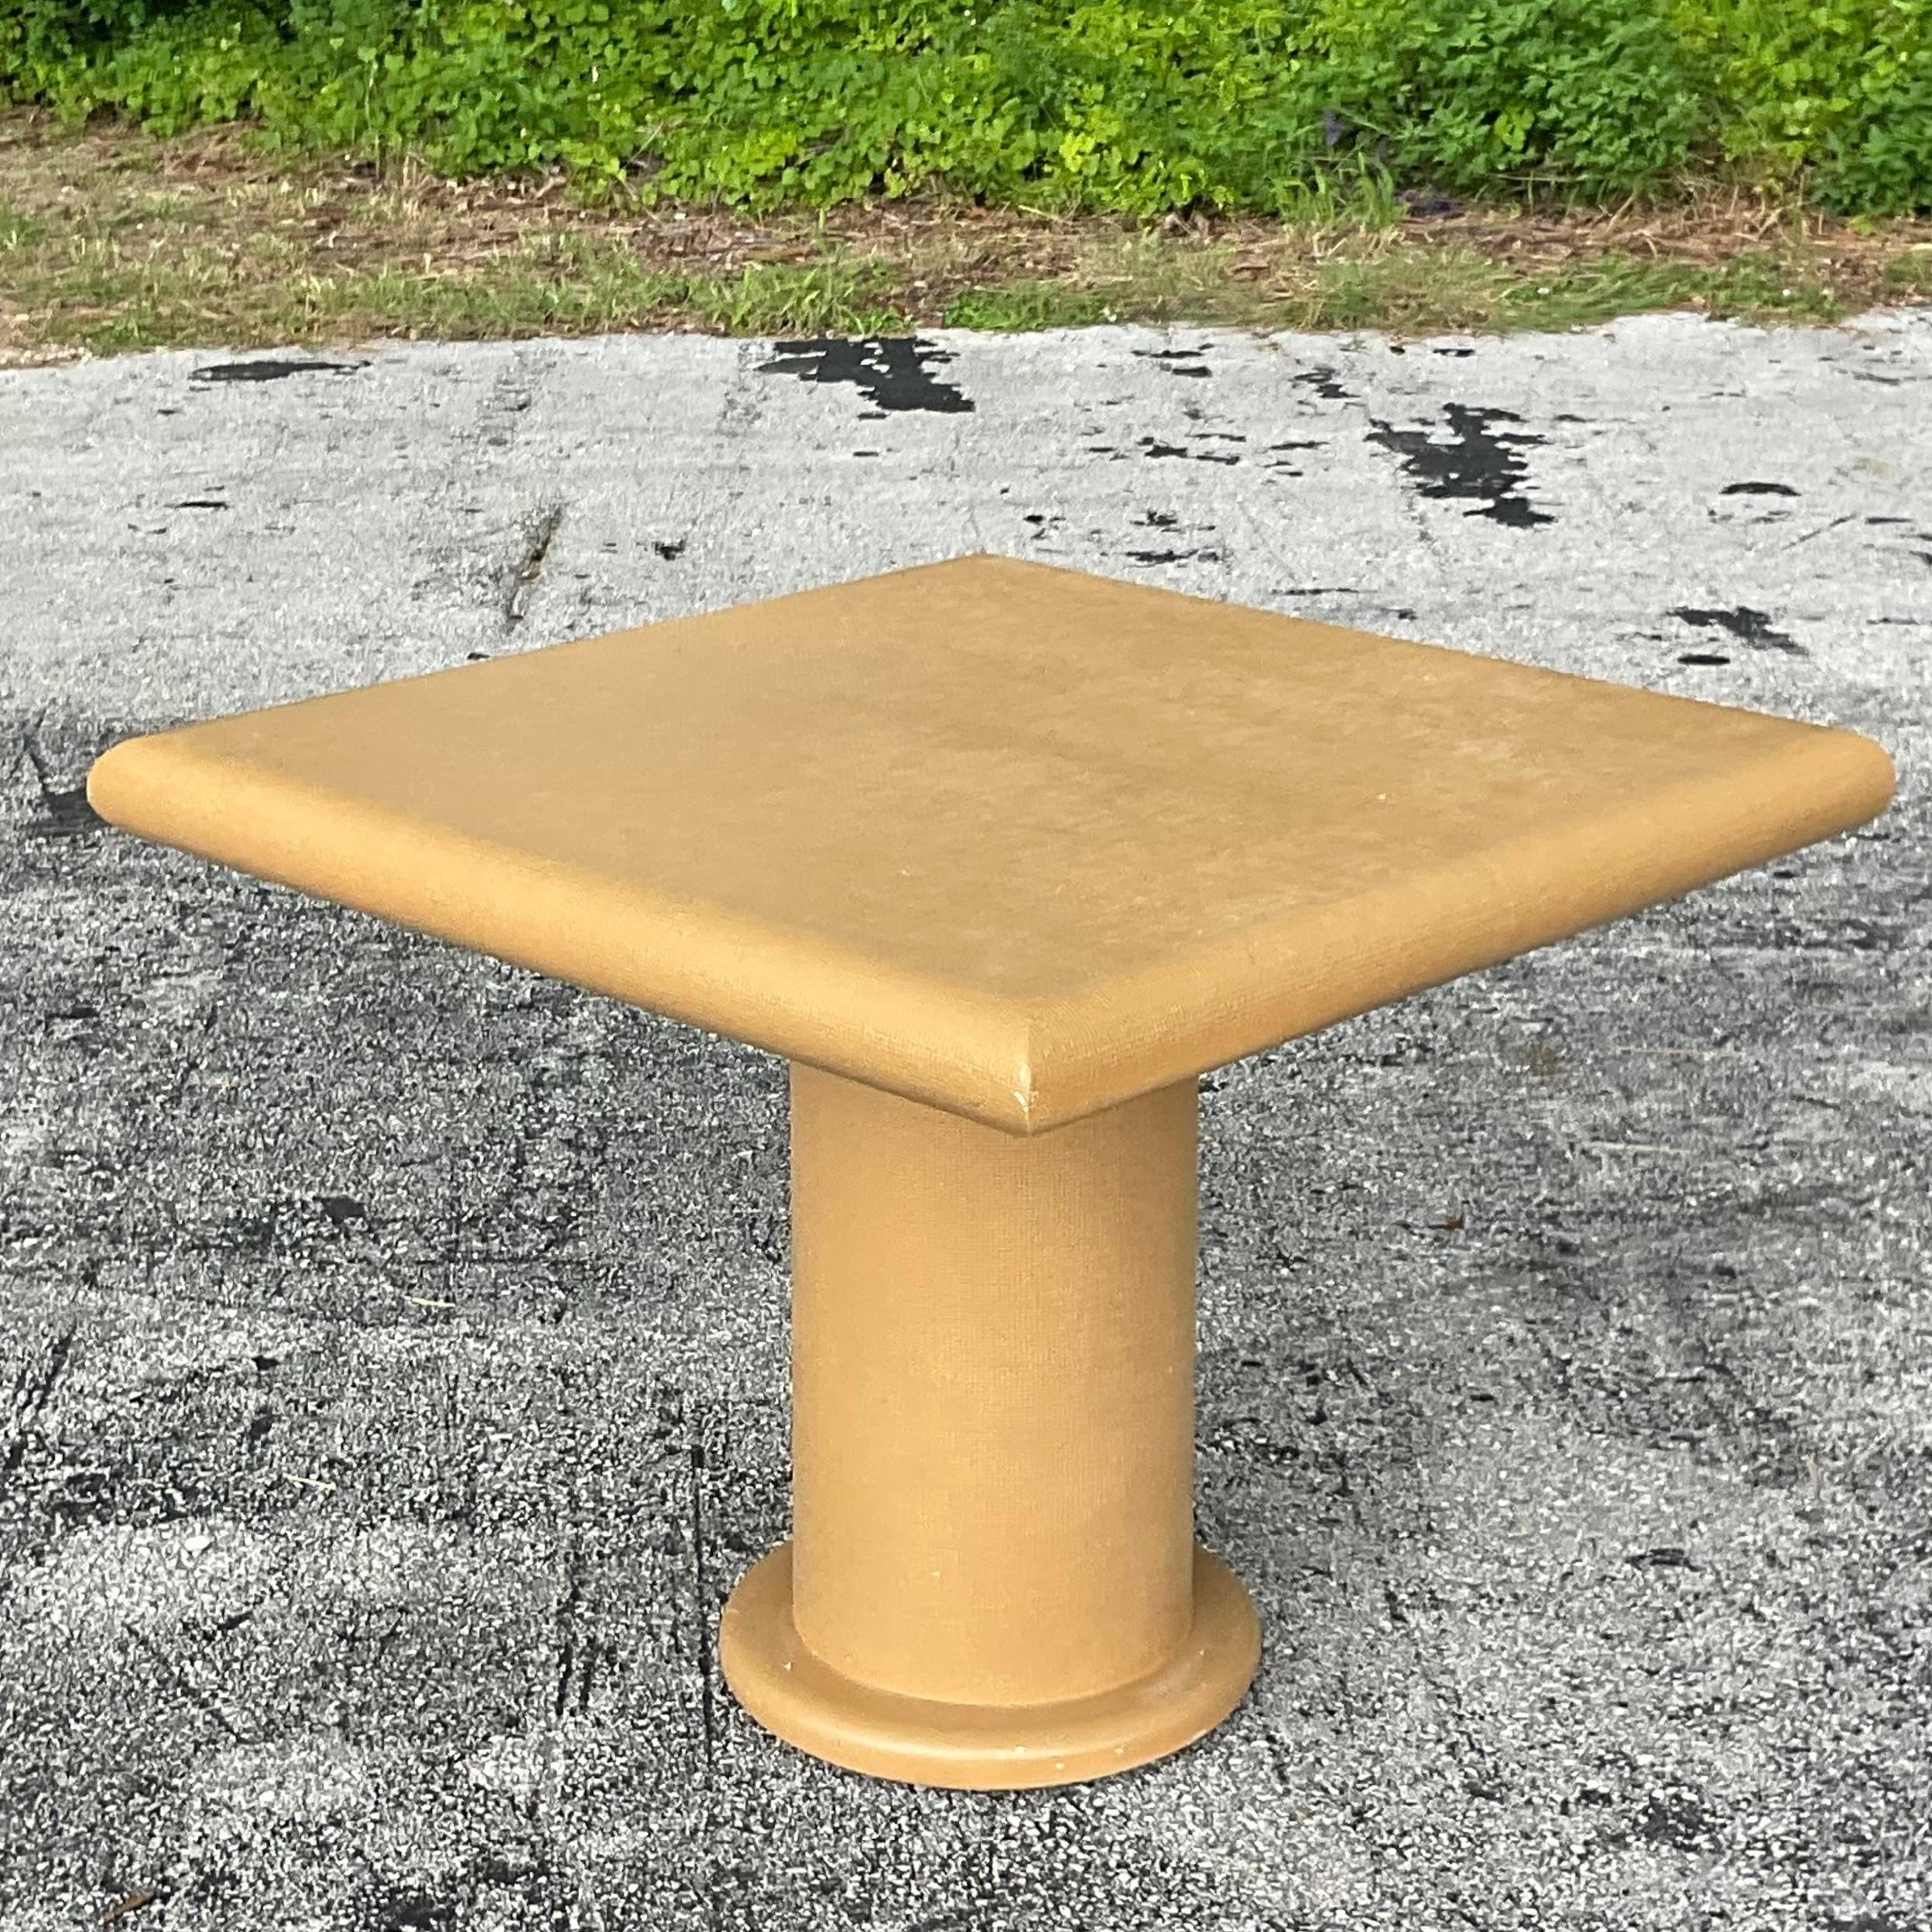 A fabulous vintage Coastal game table. A chic grass cloth finish on a chic pedestal shaped table. Bull nose edge adds to the look. Acquired from a Miami estate.